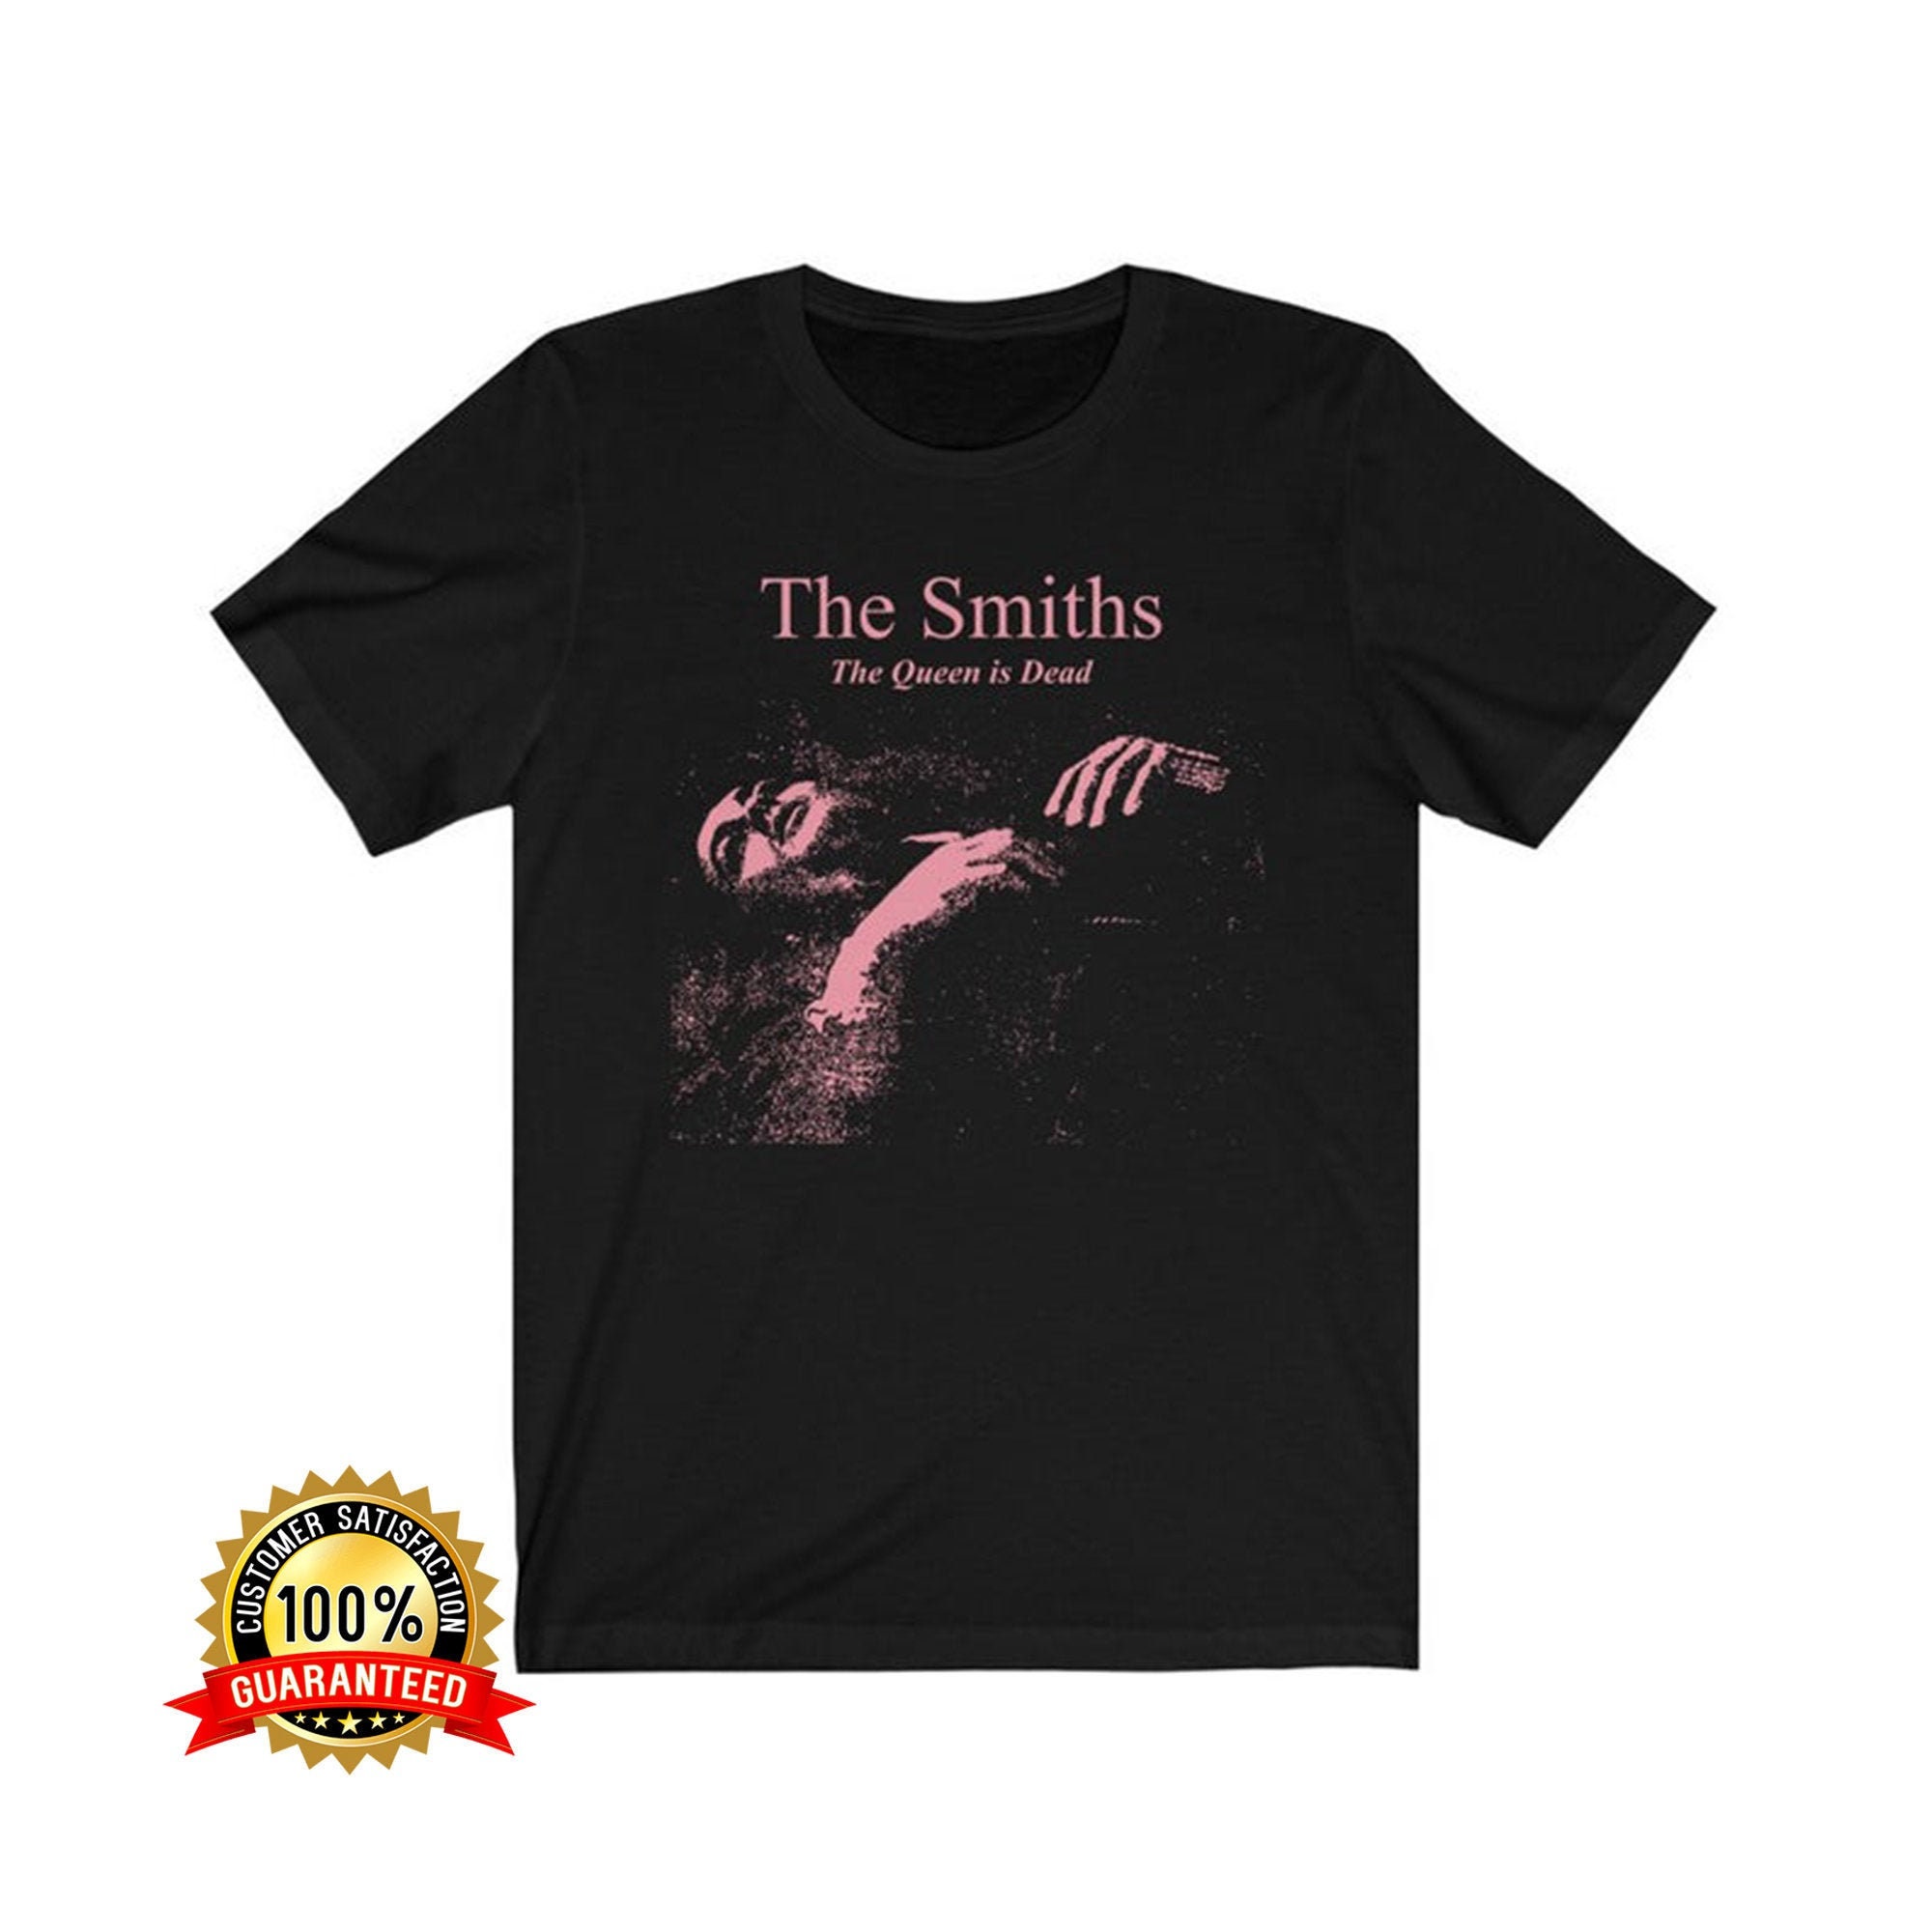 The Smiths The Queen is Dead Shirt The Smiths Shirt The | Etsy